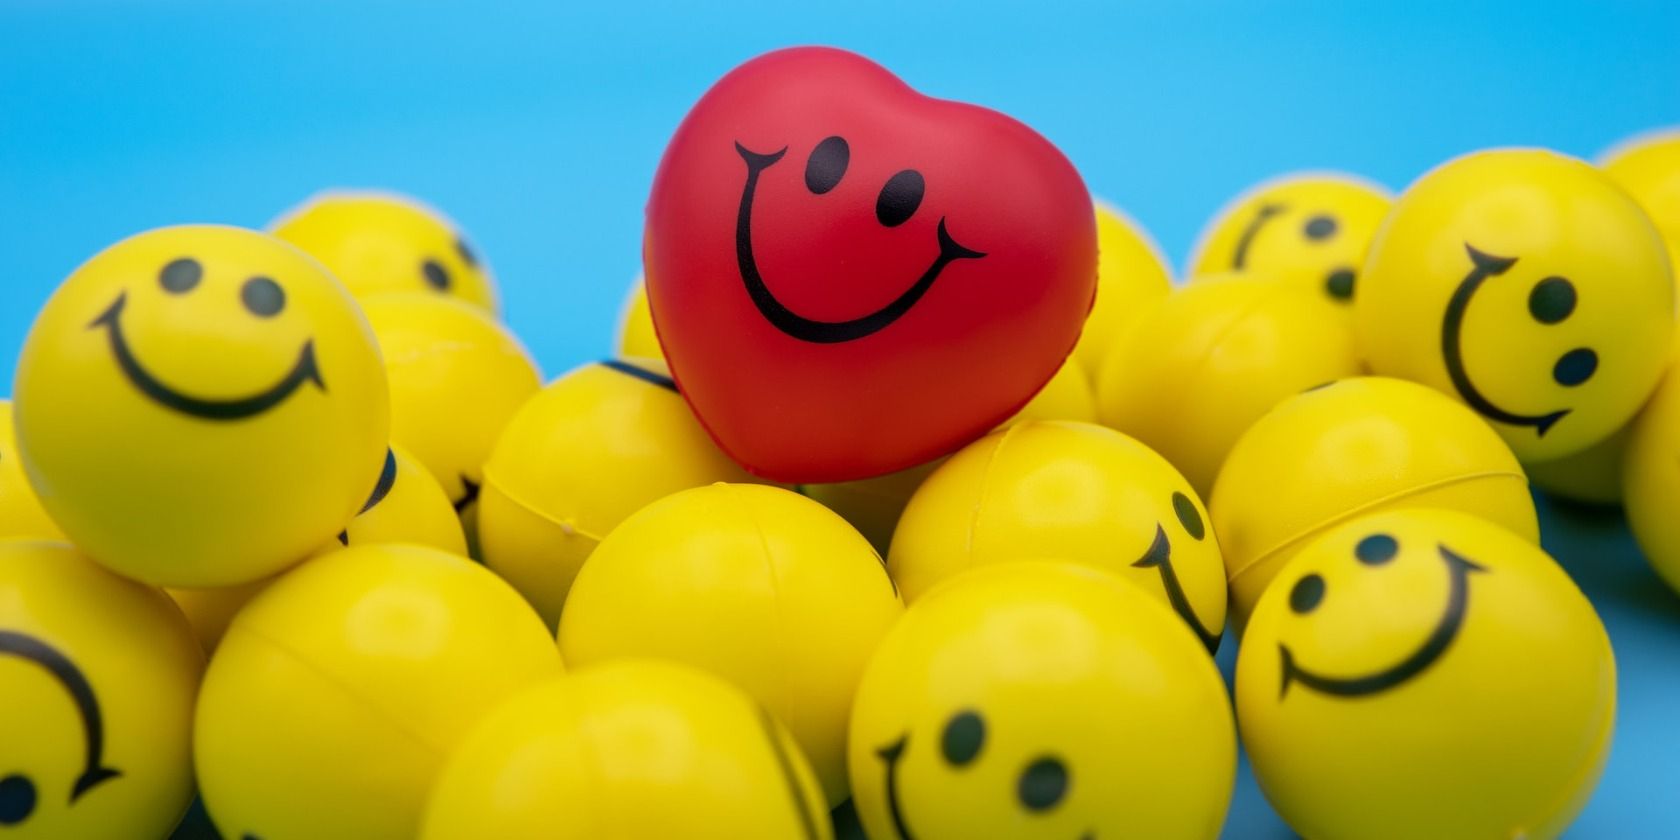 A pile of smiley emoji faces